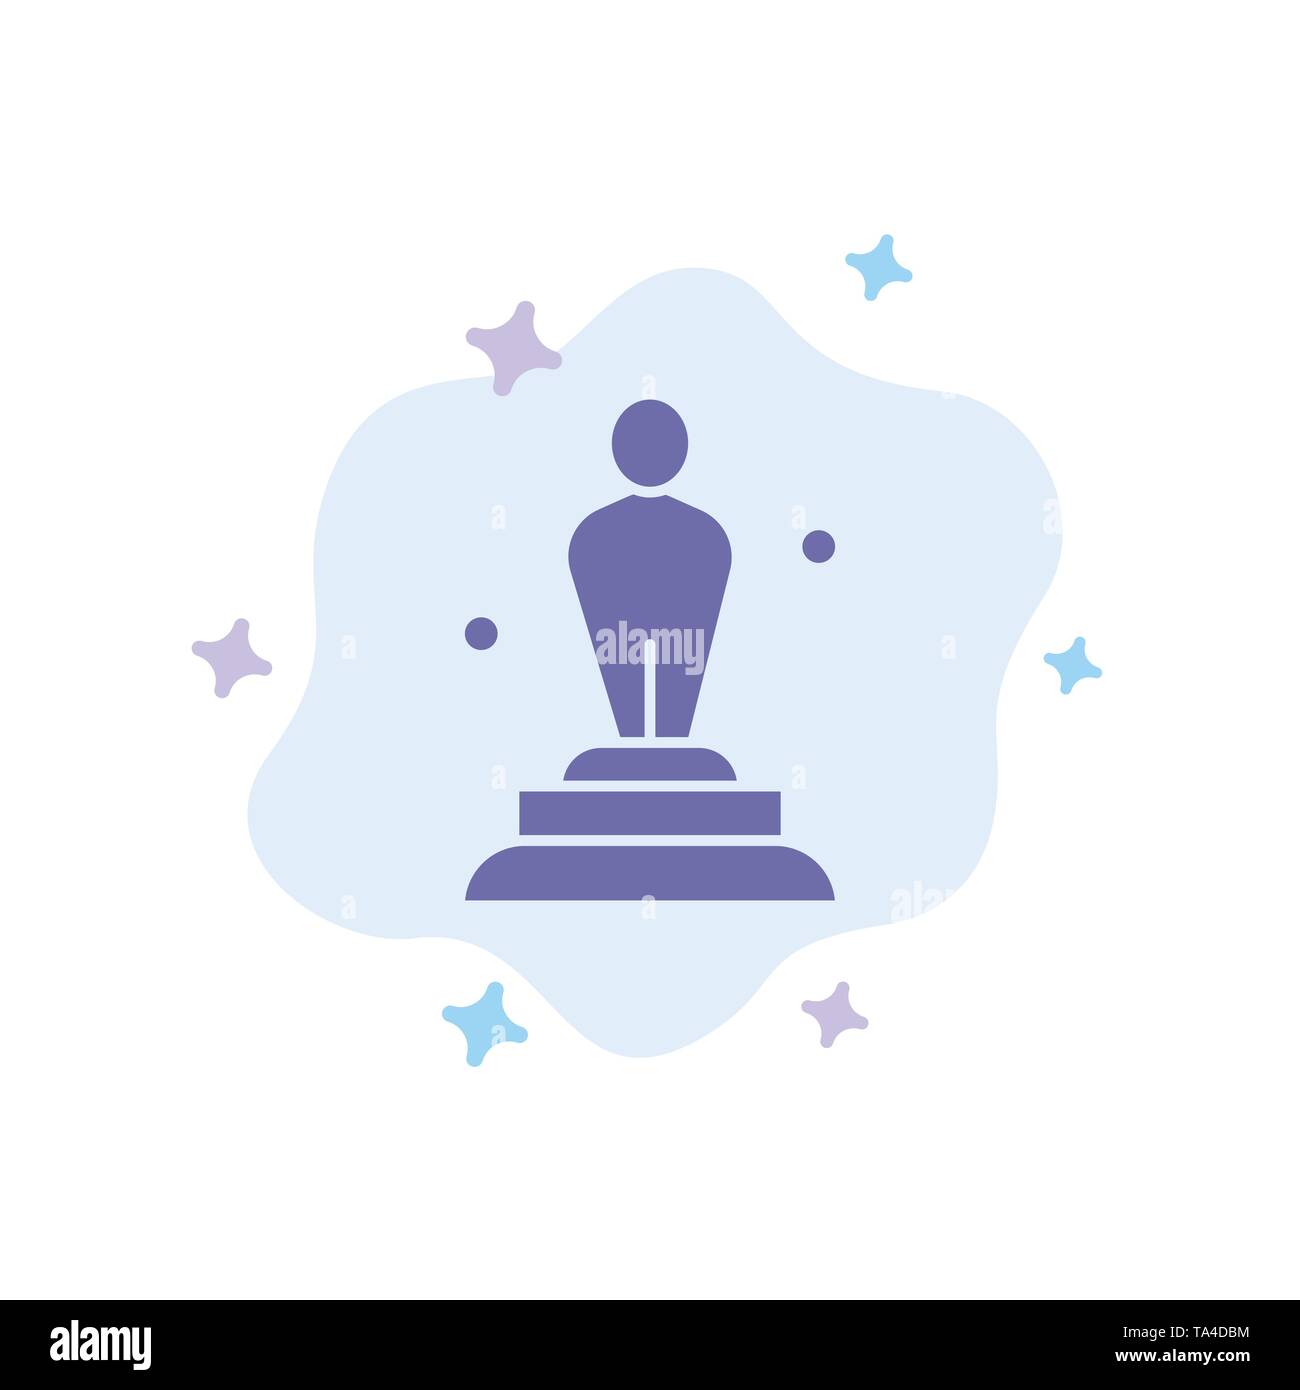 Academy, Award, Oscar, Statue, Trophy Blue Icon on Abstract Cloud Background Stock Vector